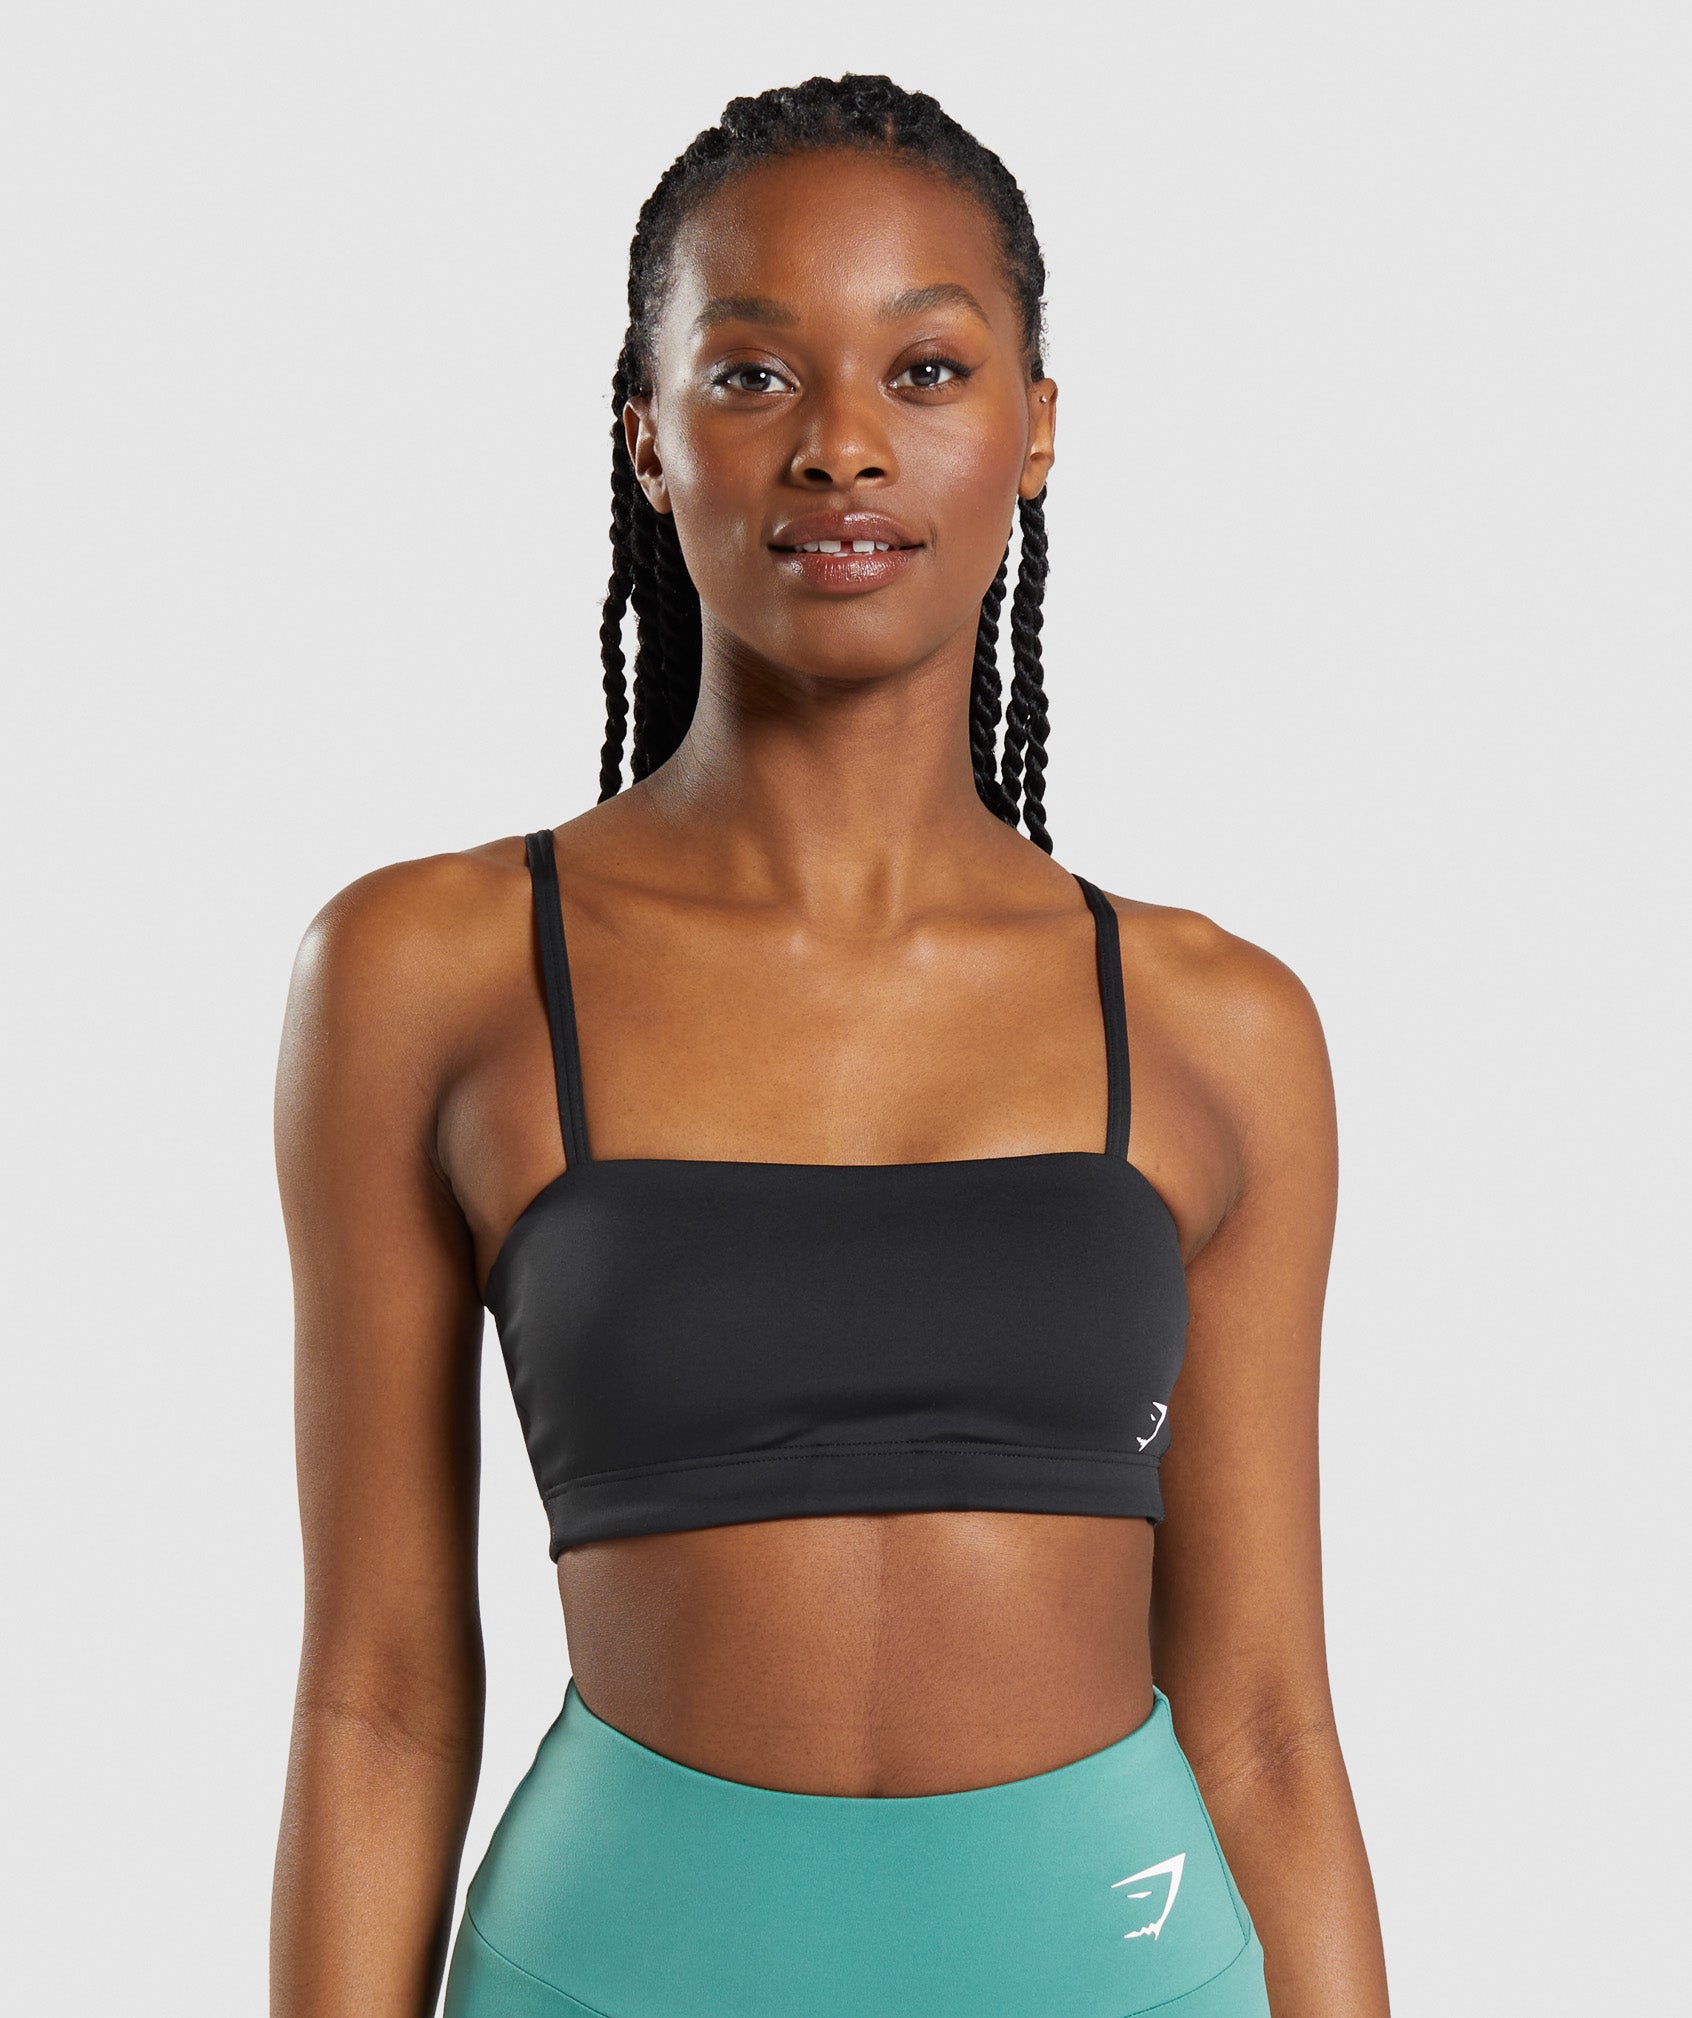 Bandeau Sports Bra in Black is out of stock